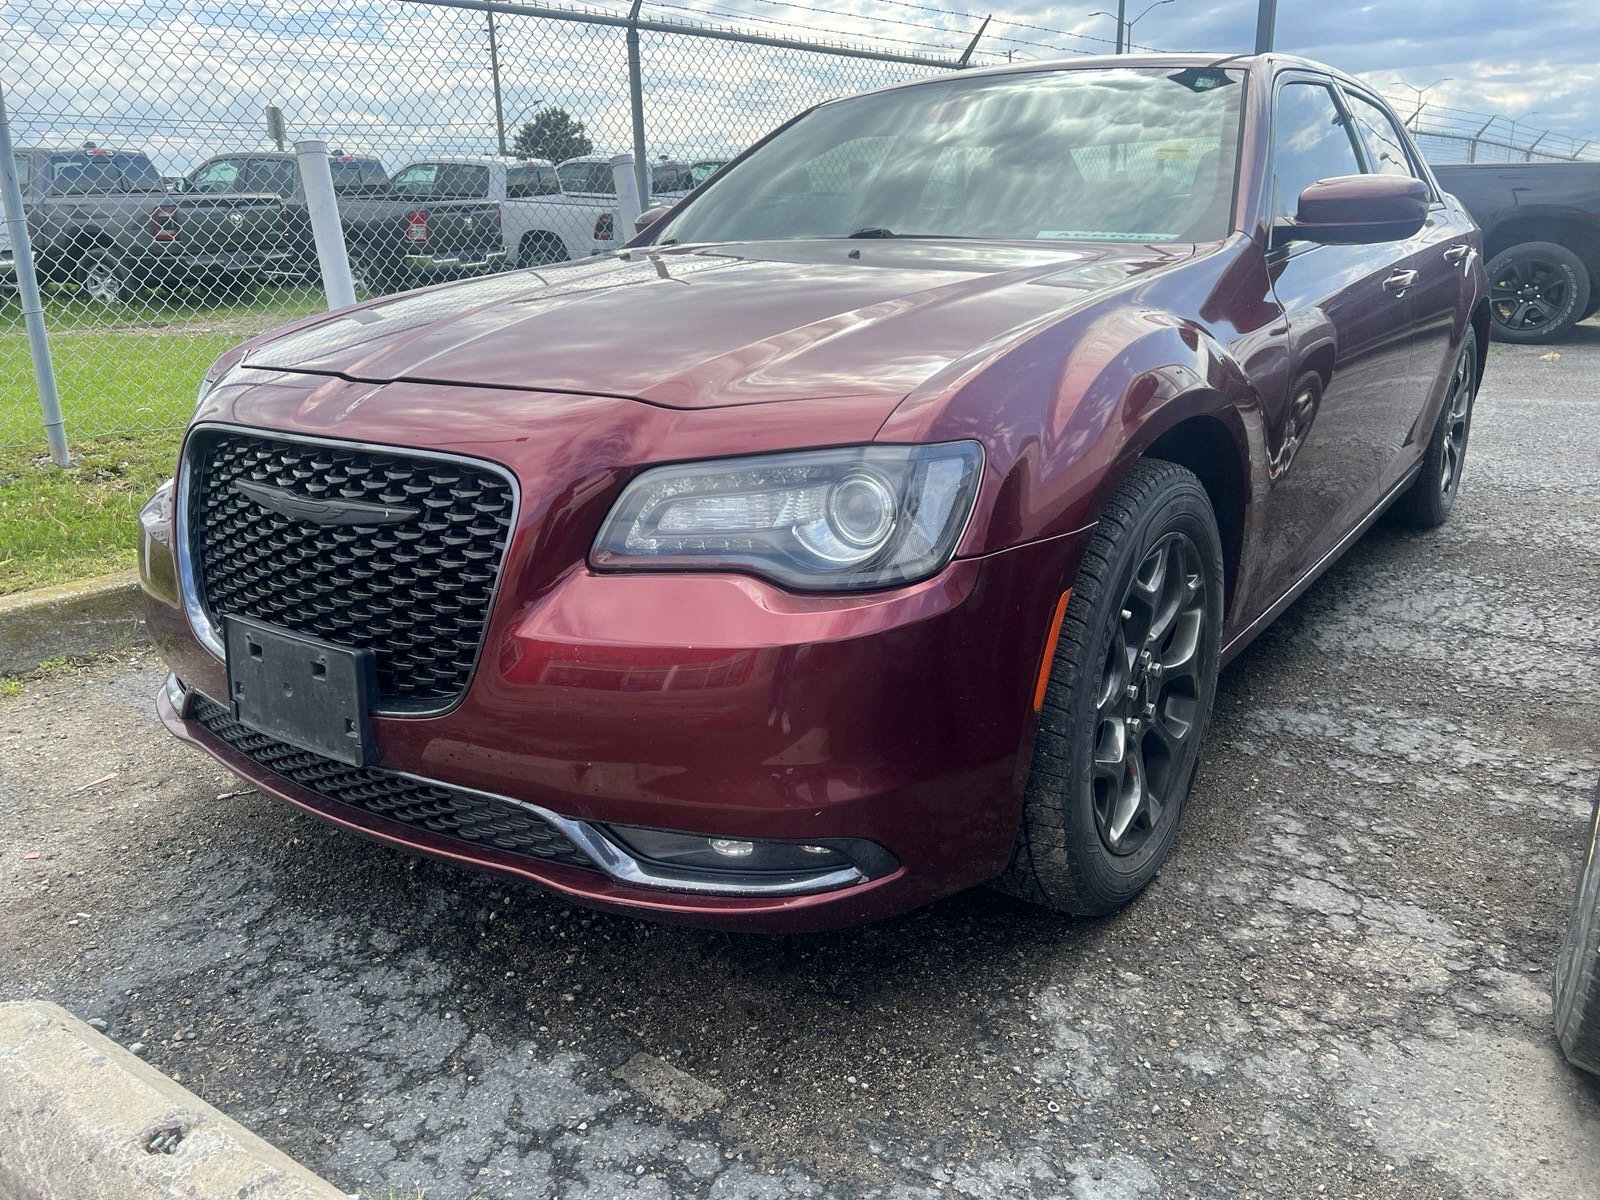 2018 Chrysler 300 300S**AWD**LEATHER**PANORAMIC SUNROOF**8.4 SCREEN*